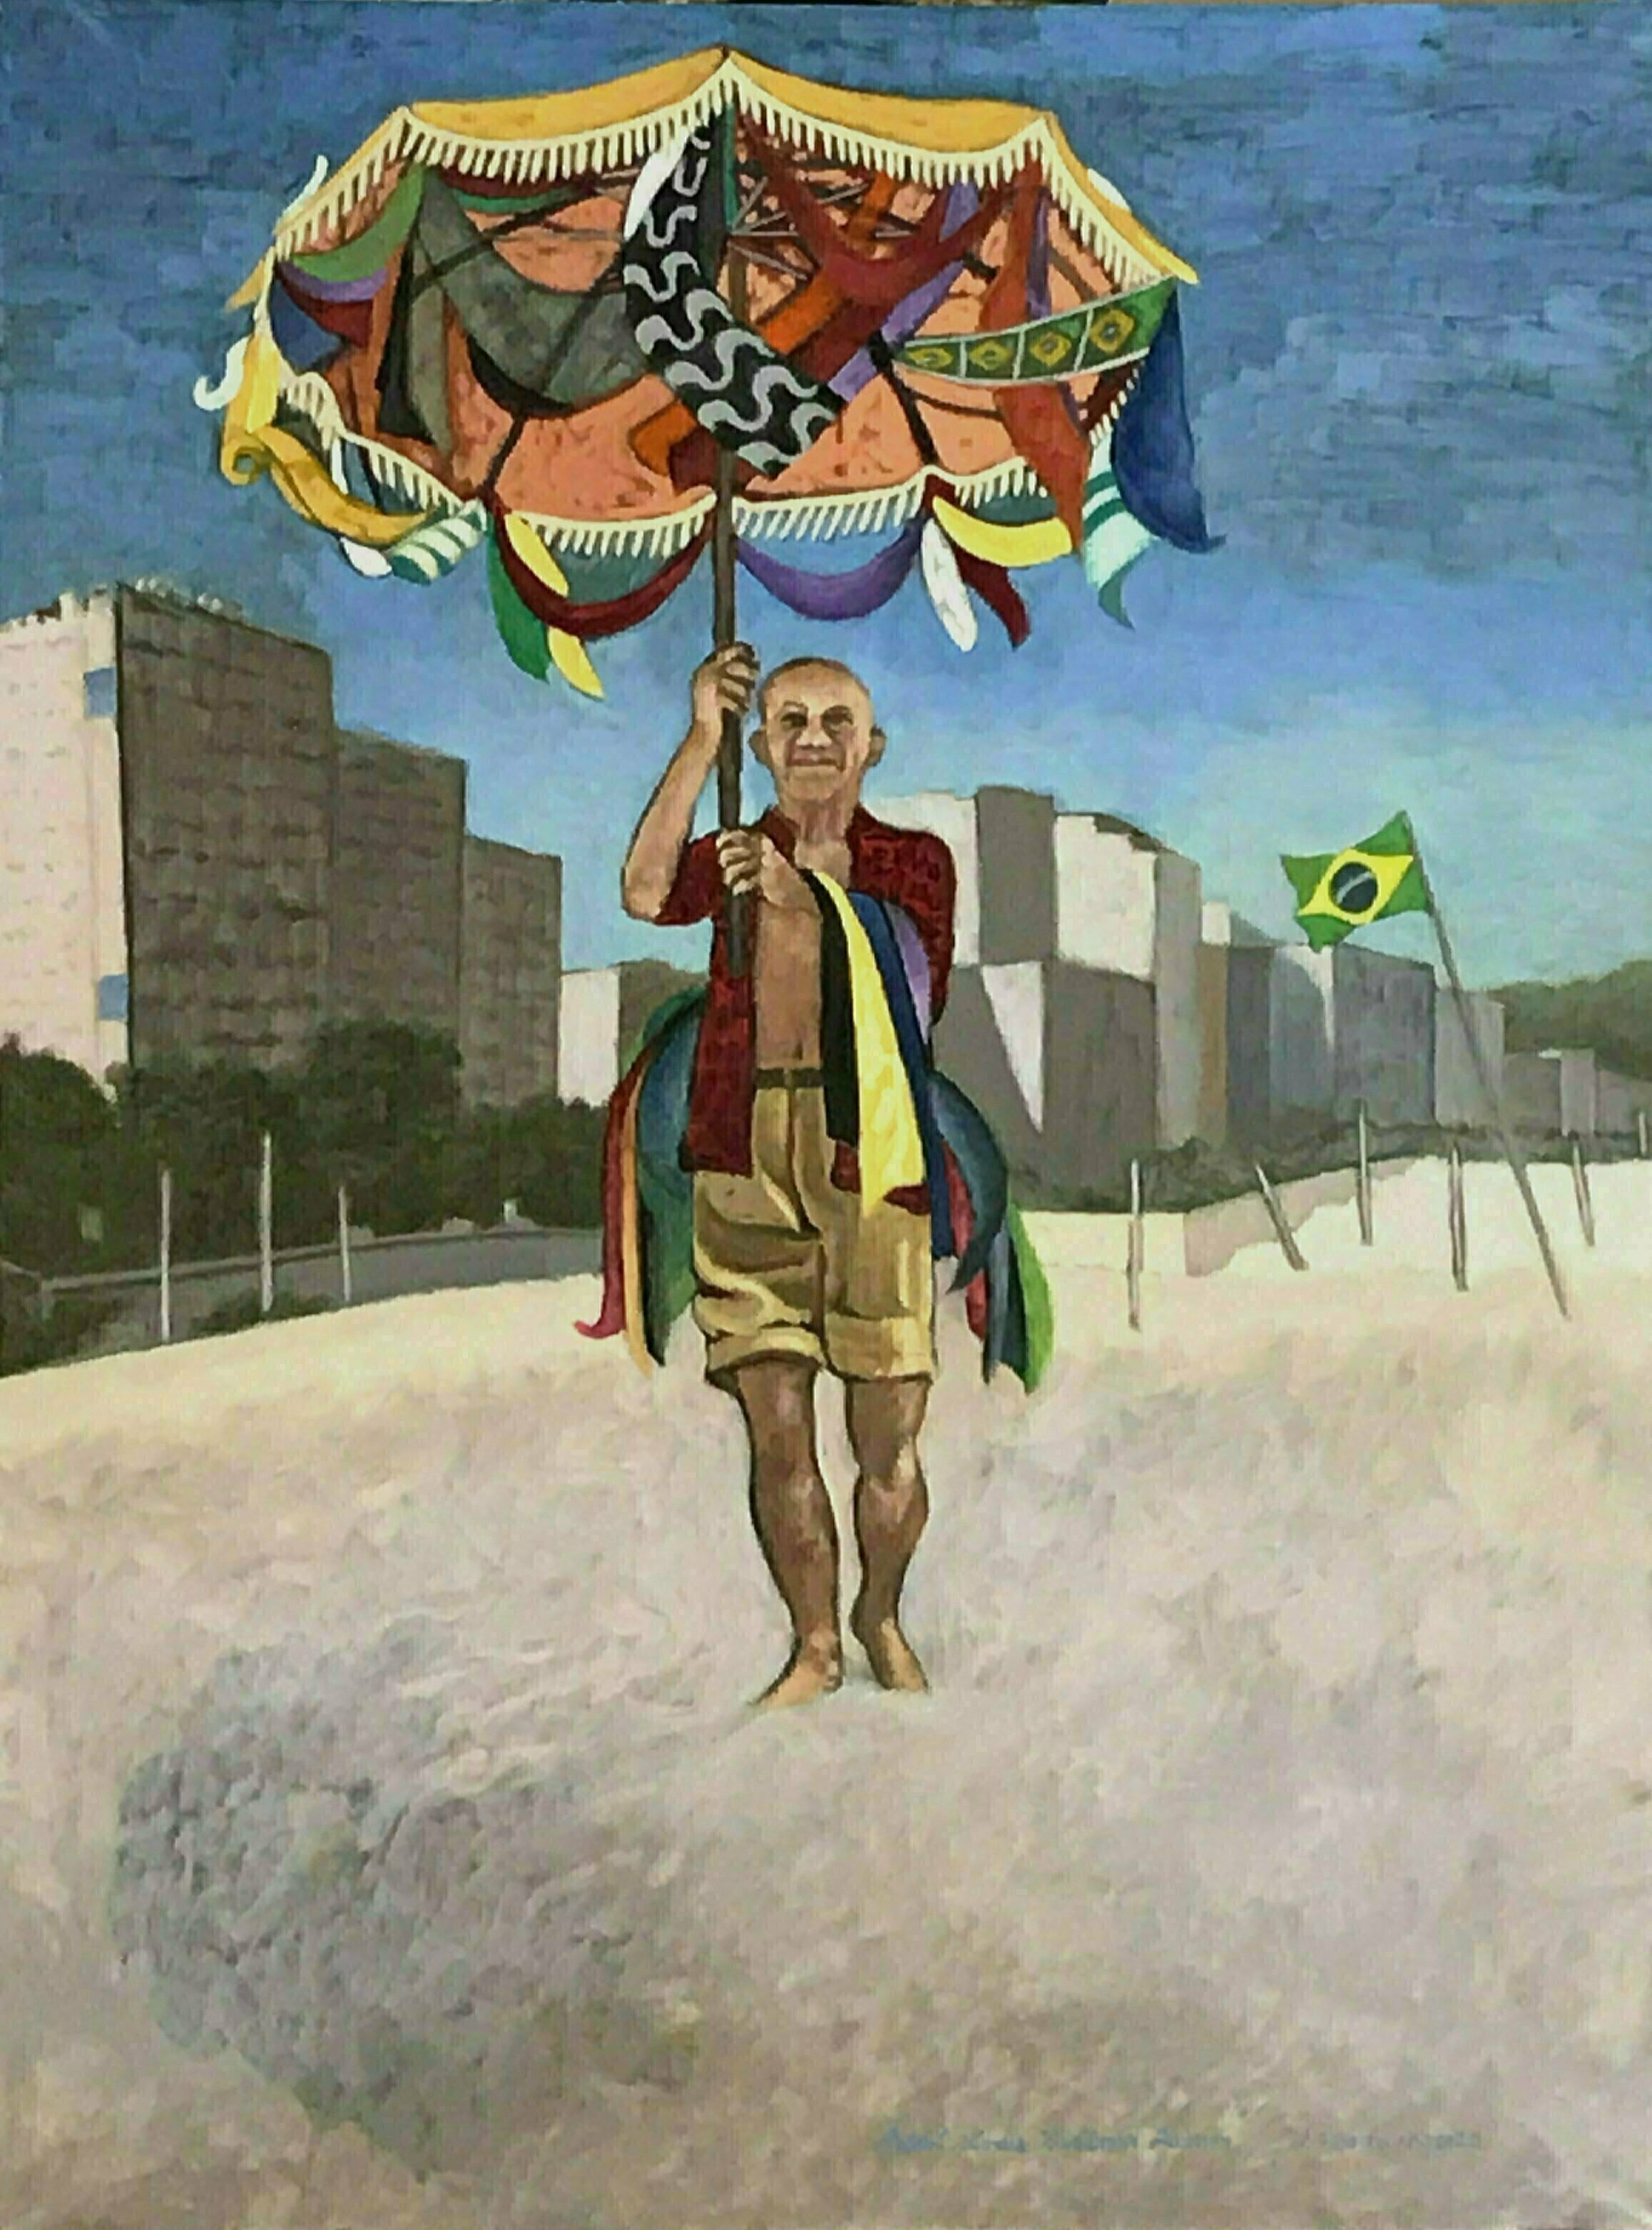 Lou Posner; Picasso On Copacabana Beach, 2020, Original Painting Oil, 30 x 40 inches. Artwork description: 241 Picasso visits Copacabana Beach, Brazil, bringing a New Year s gift of color and delight which sparks joy. ...